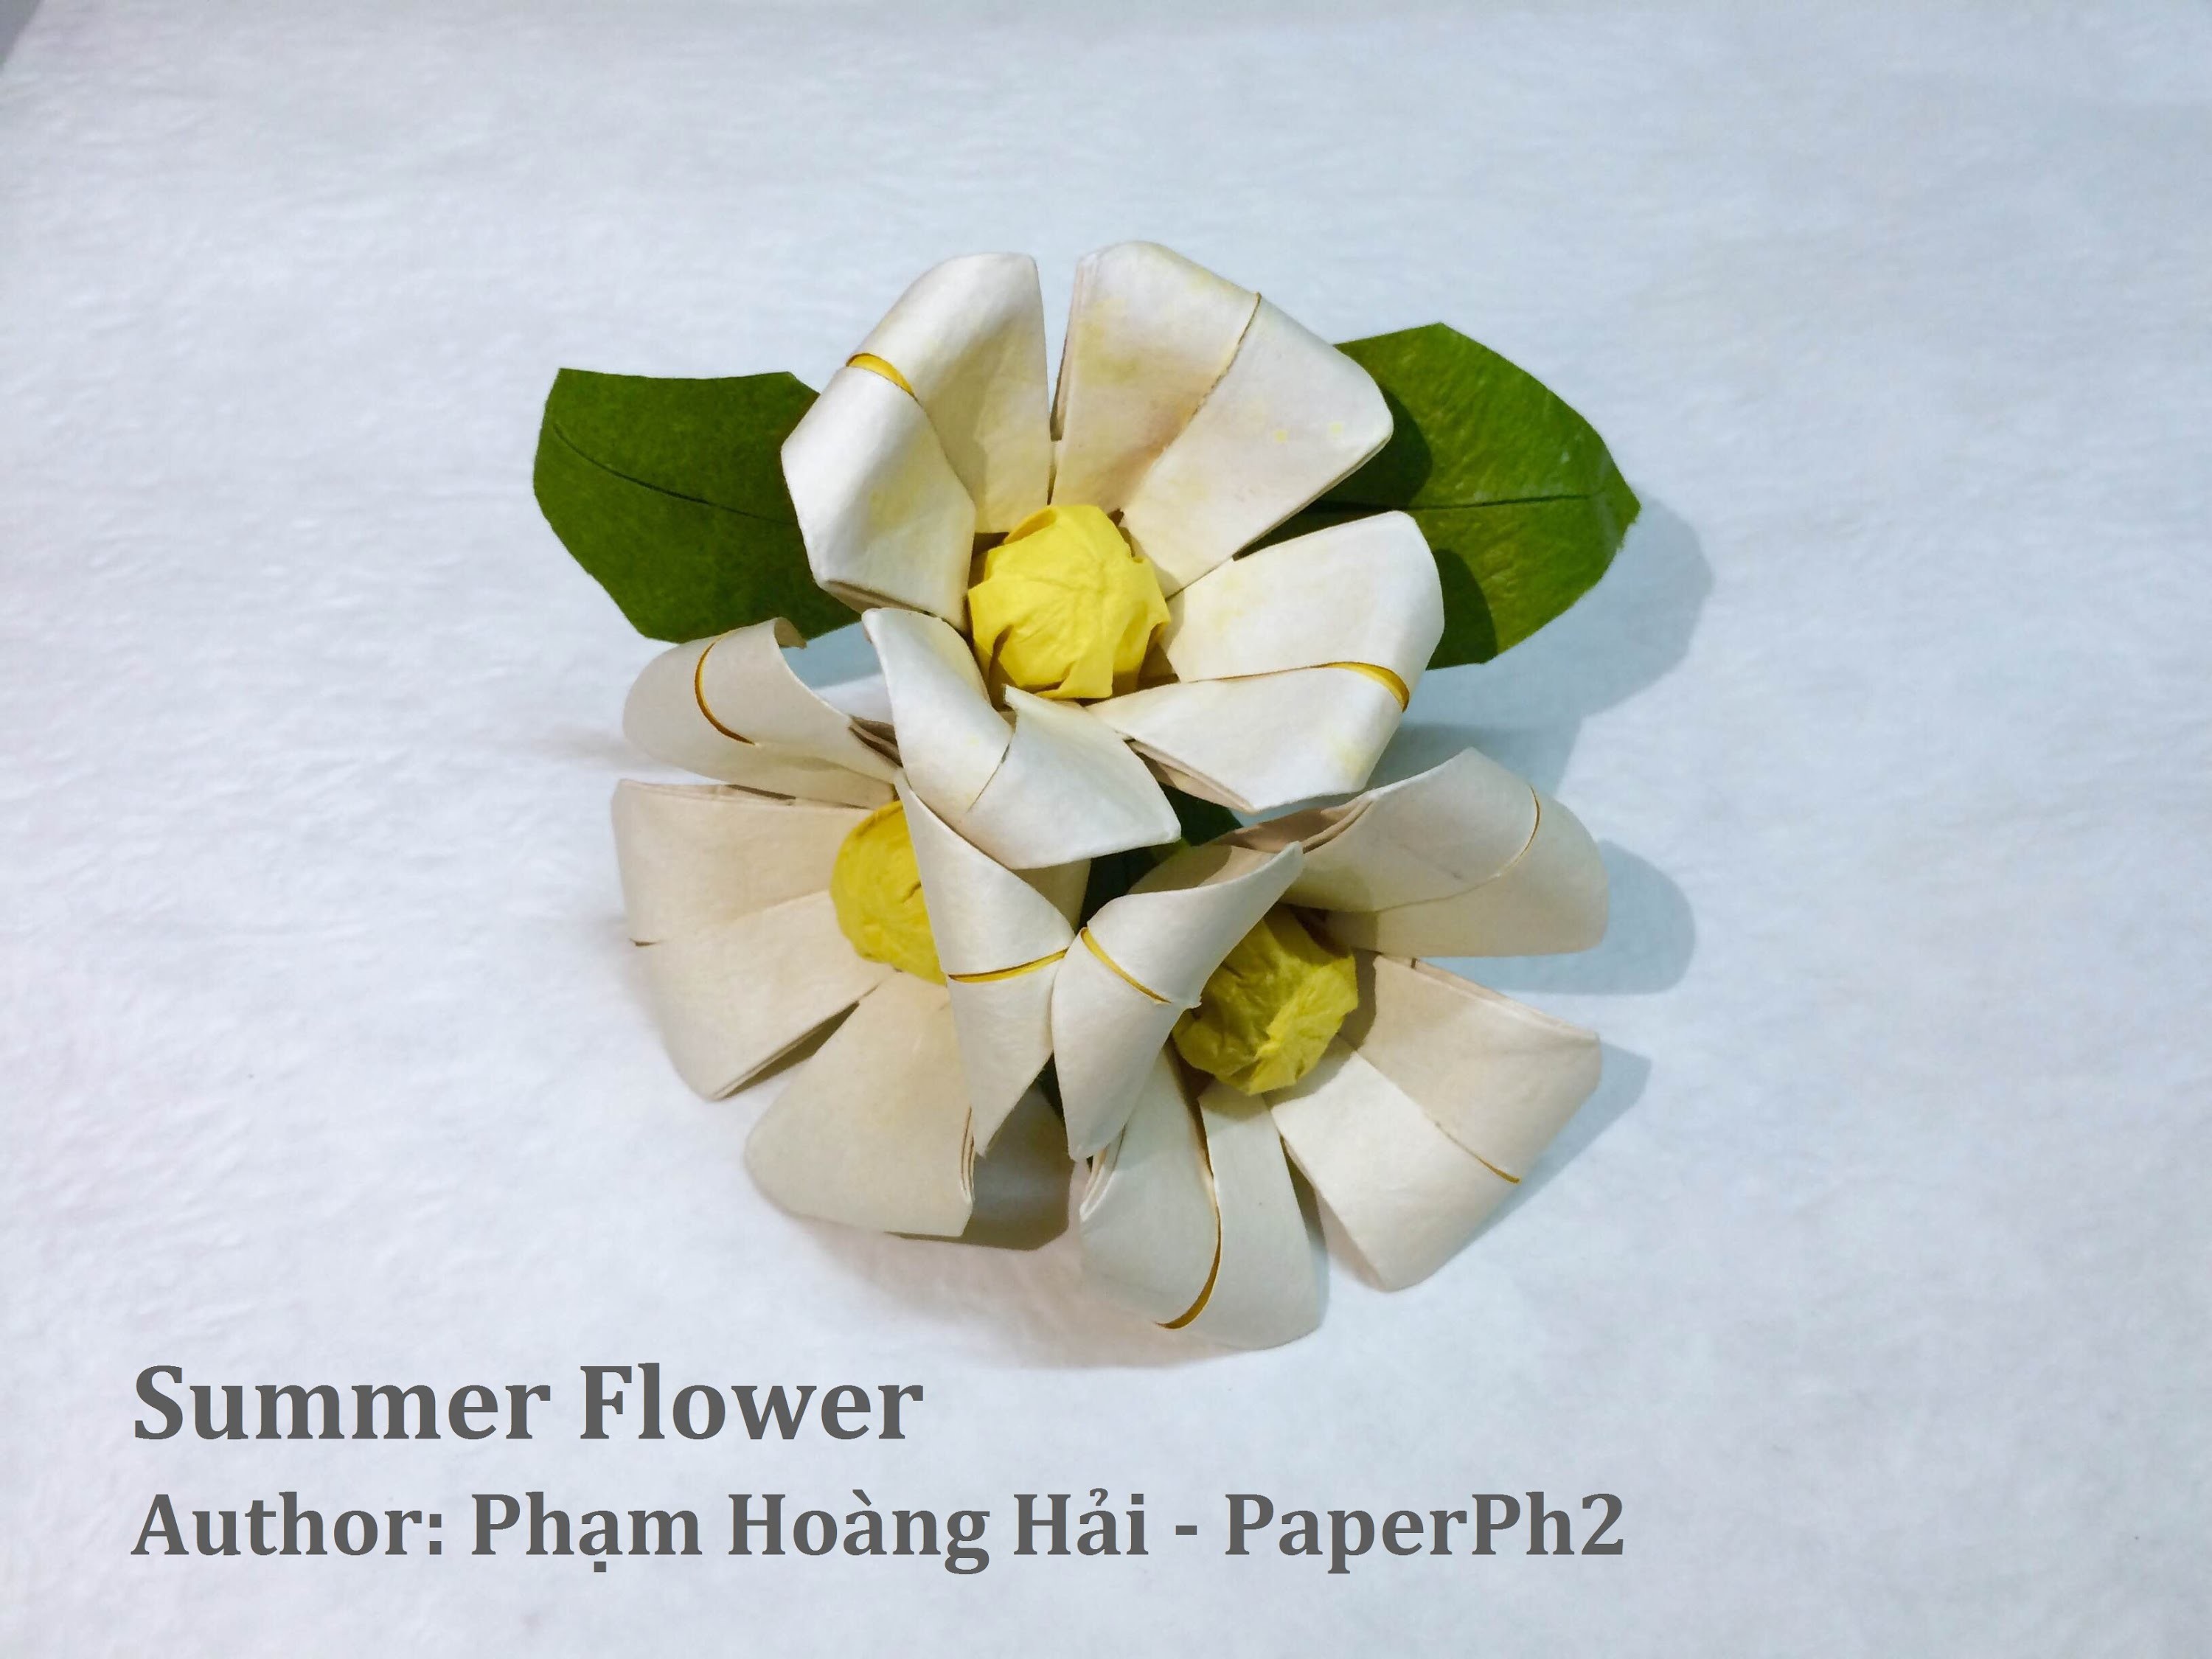 Tutorial - How to make Origami Summer Flower by Phạm Hoàng Hải - PaperPh2